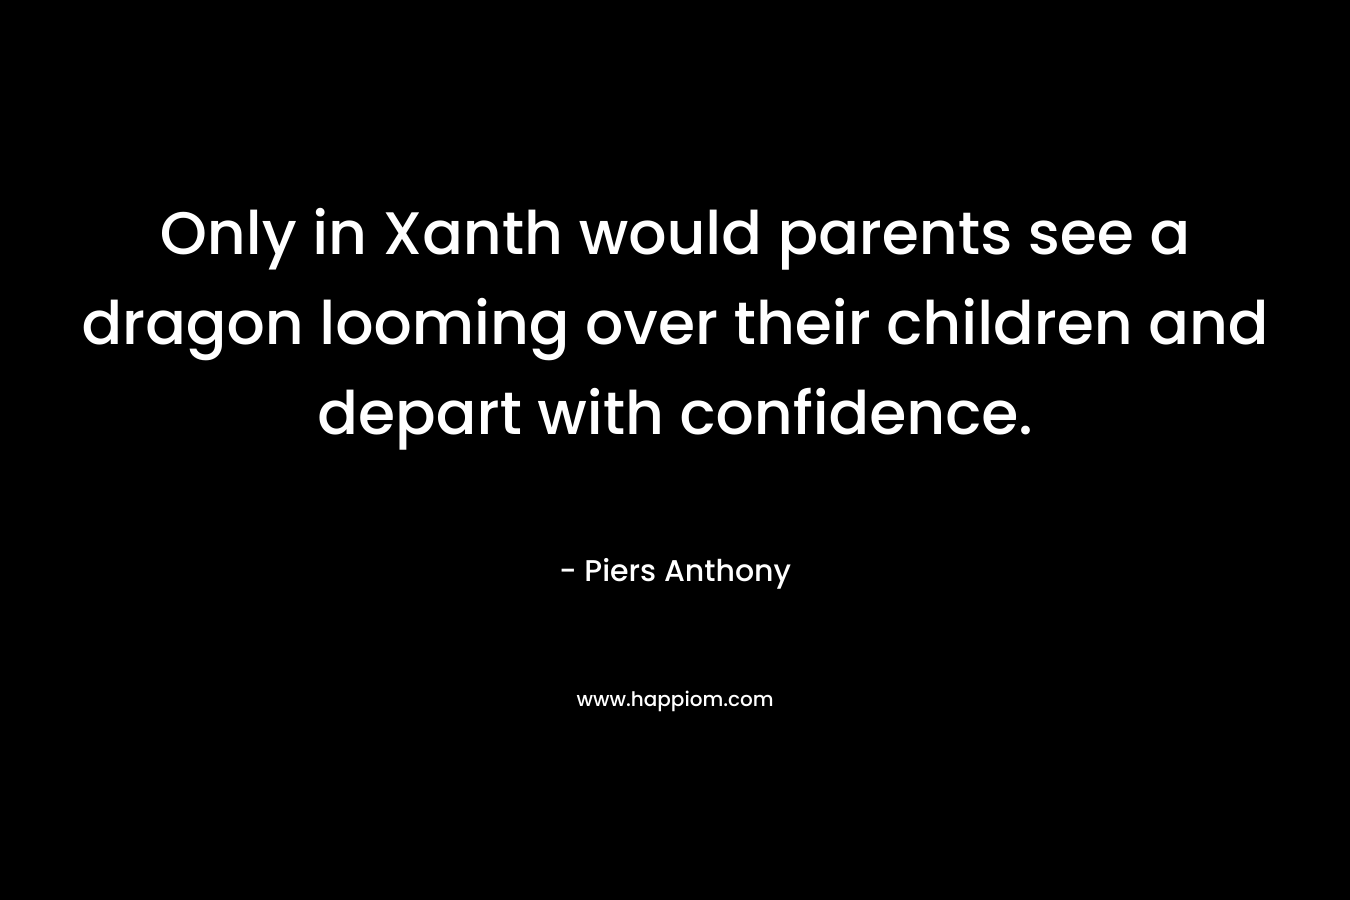 Only in Xanth would parents see a dragon looming over their children and depart with confidence. – Piers Anthony